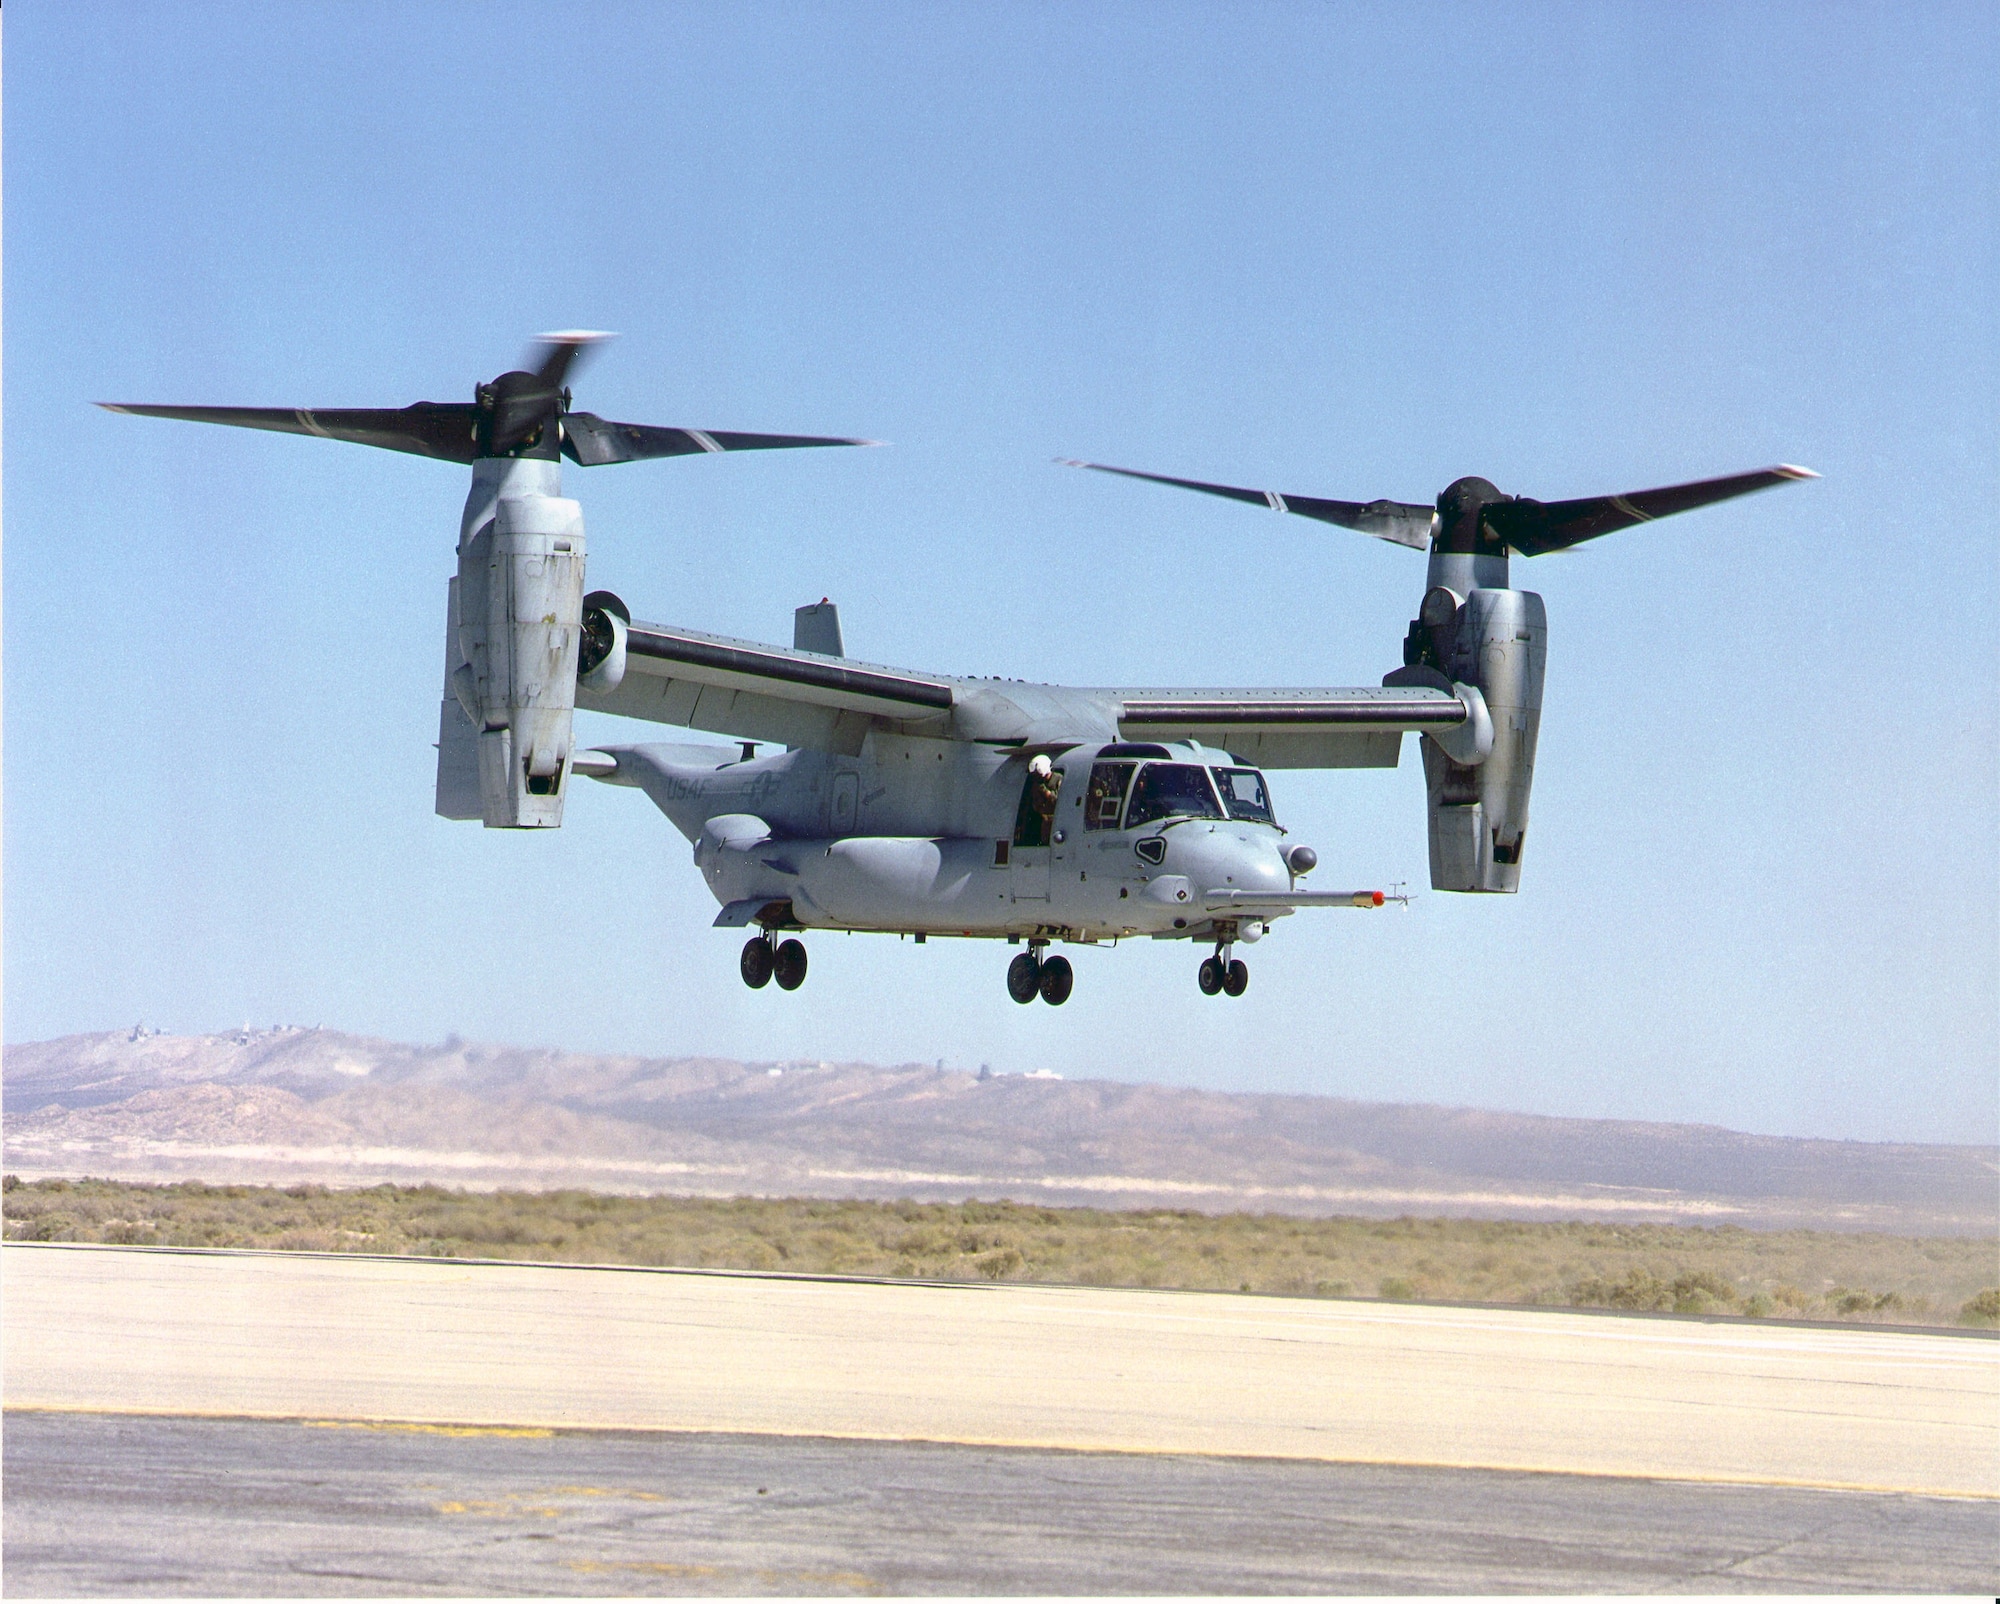 Air Force Special Operations Command officials released the results of their investigation into the CV-22 Osprey accident that occurred April 9, 2010, near Qalat, Afghanistan. Four people were killed and 16 of the 20 people onboard were injured in the accident. The CV-22, like the one shown here, is a tilt-rotor vertical takeoff and landing aircraft. (Courtesy photo)